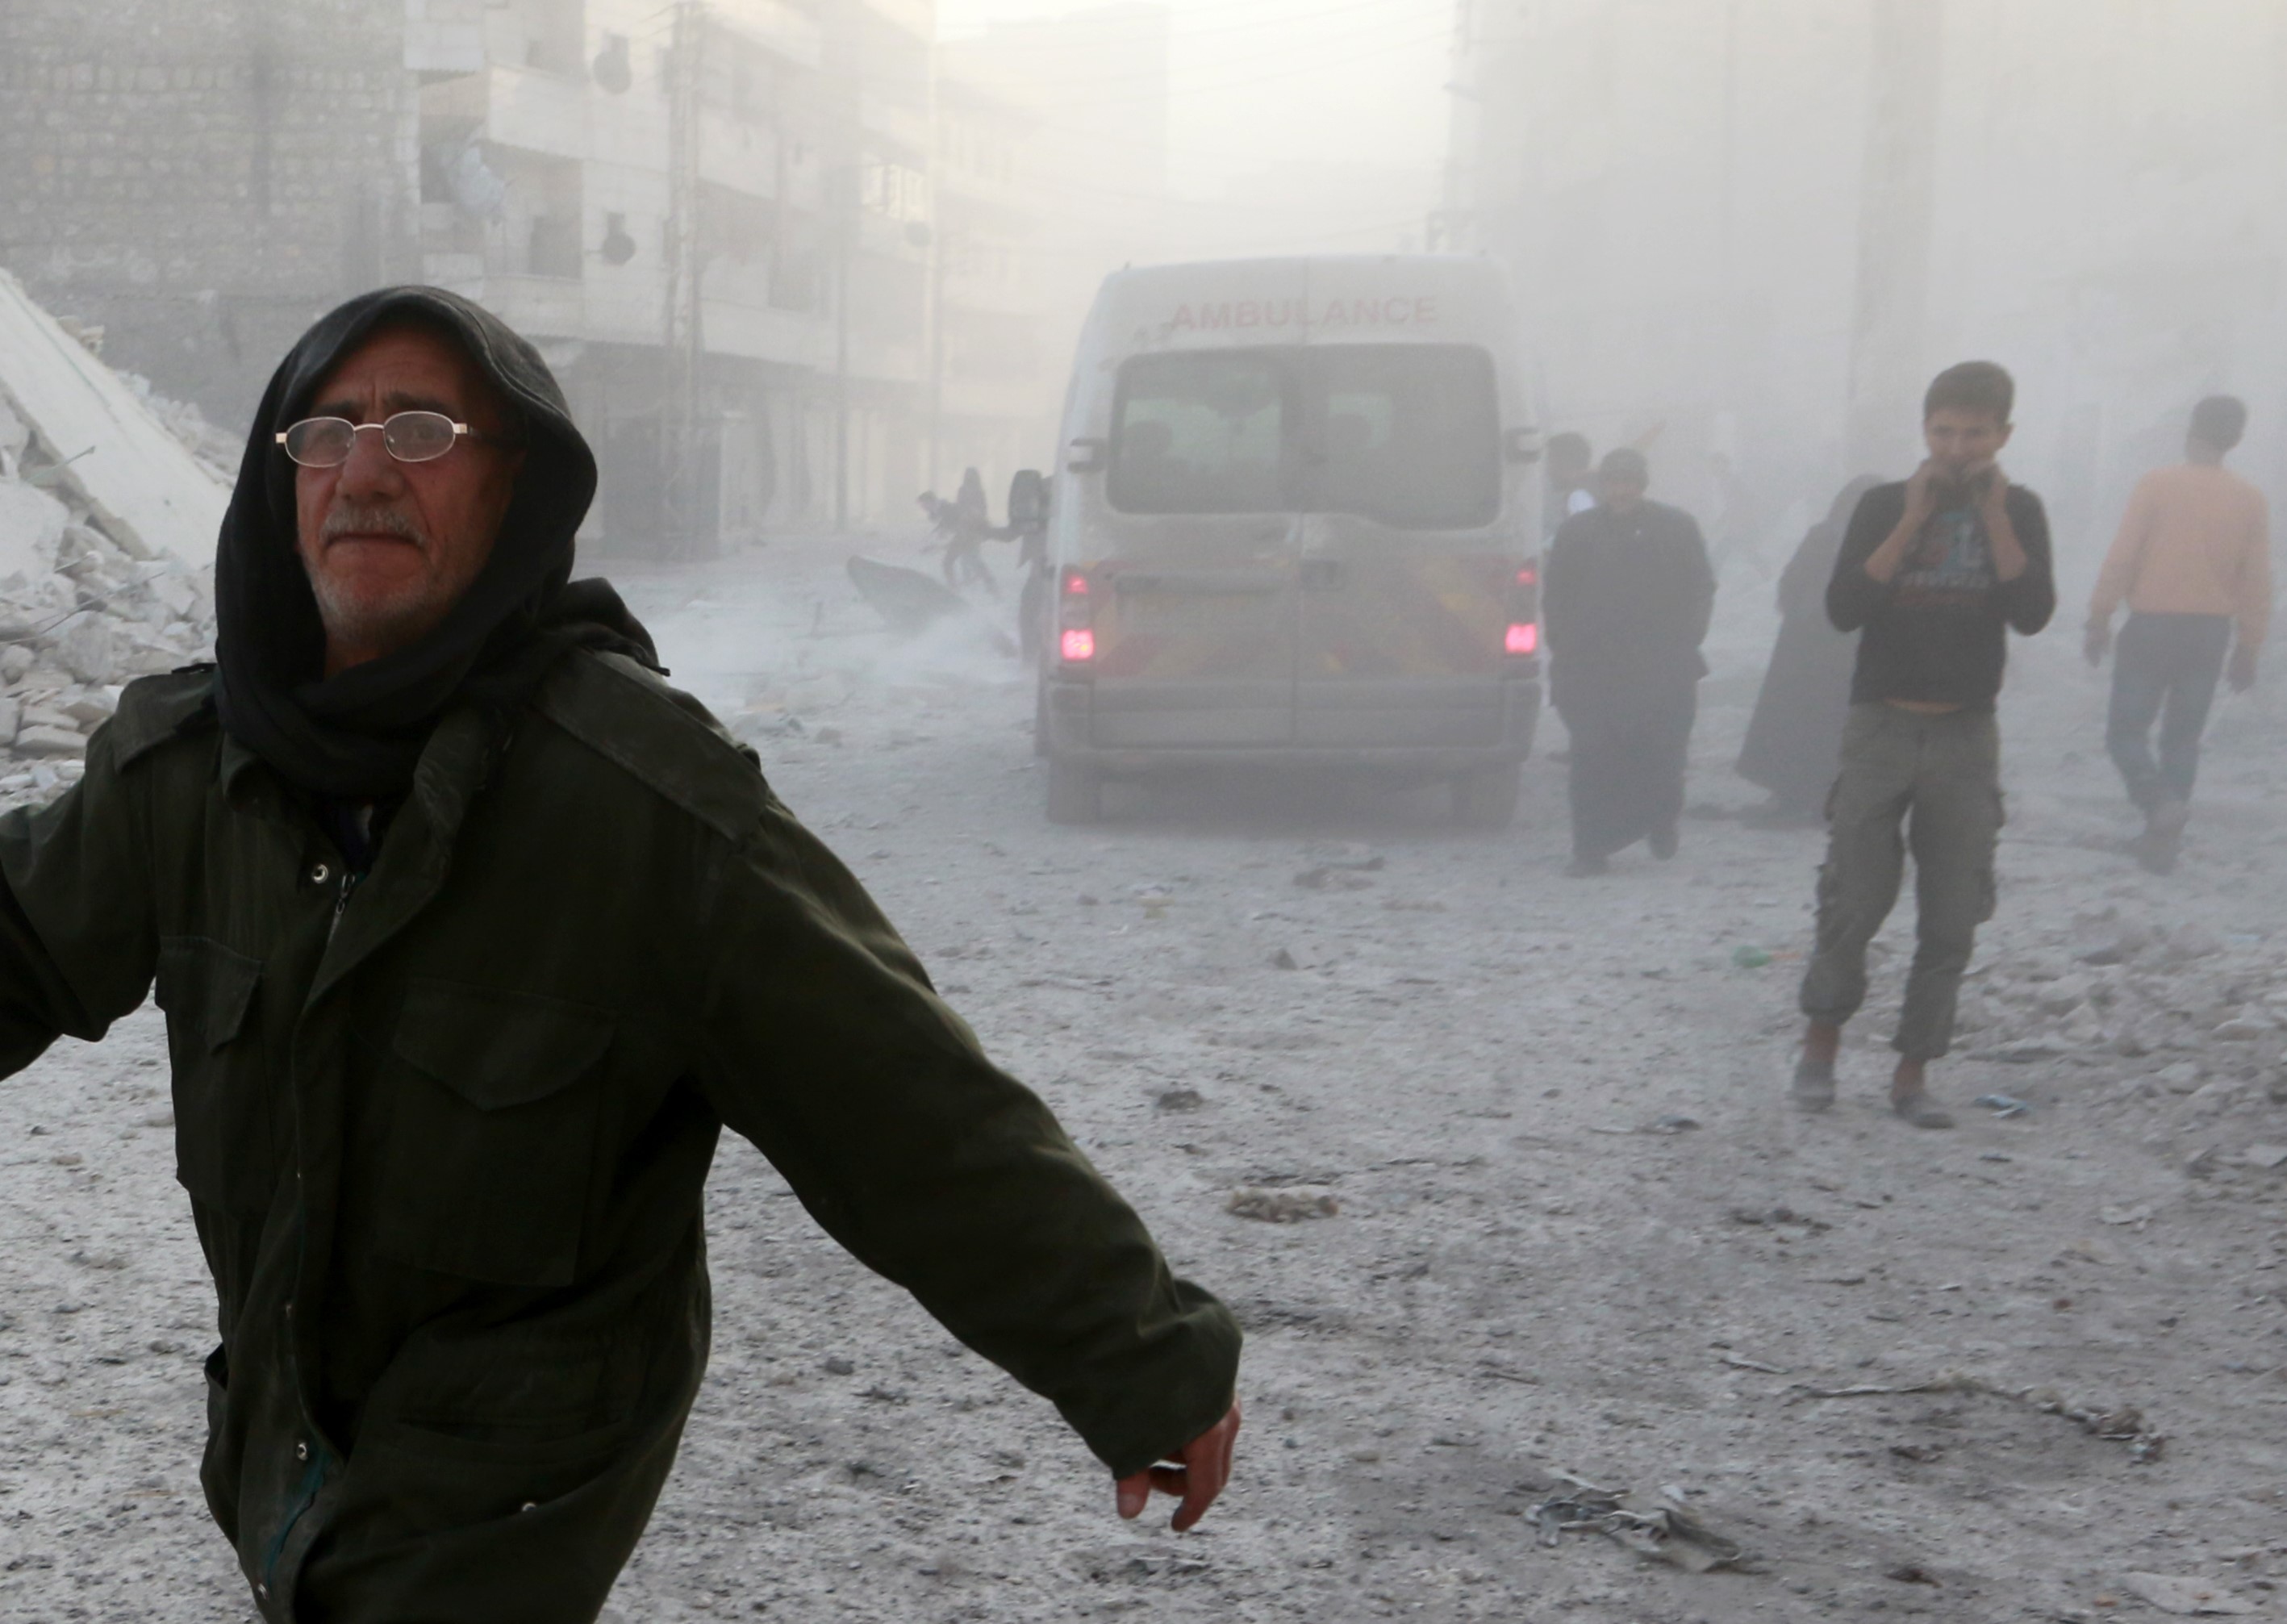 People run away after the war crafts belonging to the Syrian and Russian forces carried out airstrikes on residential areas at the opposition controlled Salihin neighborhood of Aleppo, Syria on Nov. 15, 2016. (Jawad al Rifai—Anadolu Agency/Getty Images)